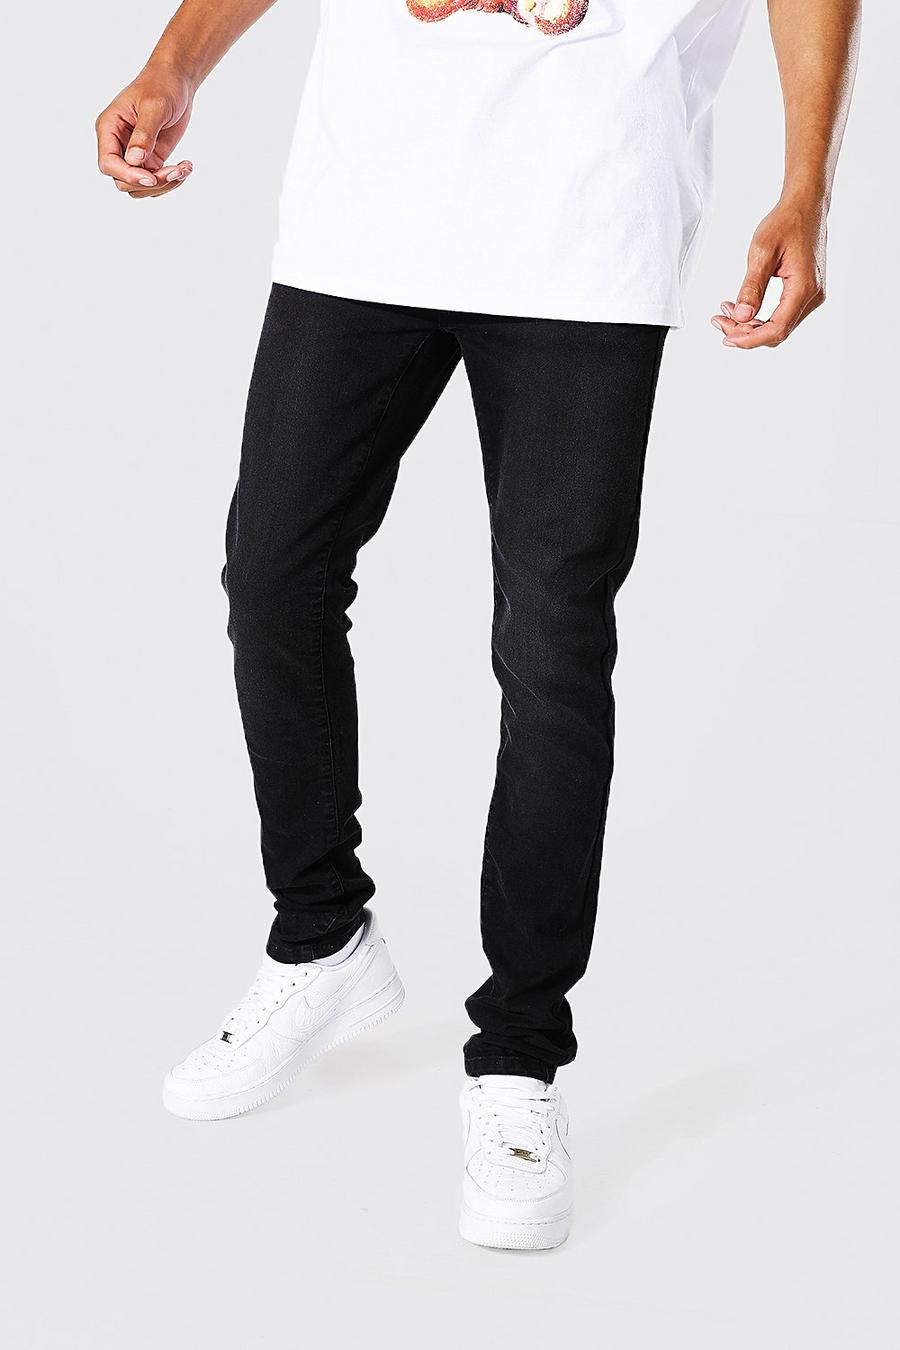 Jeans Tall Skinny Fit Stretch con cotone riciclate, Washed black